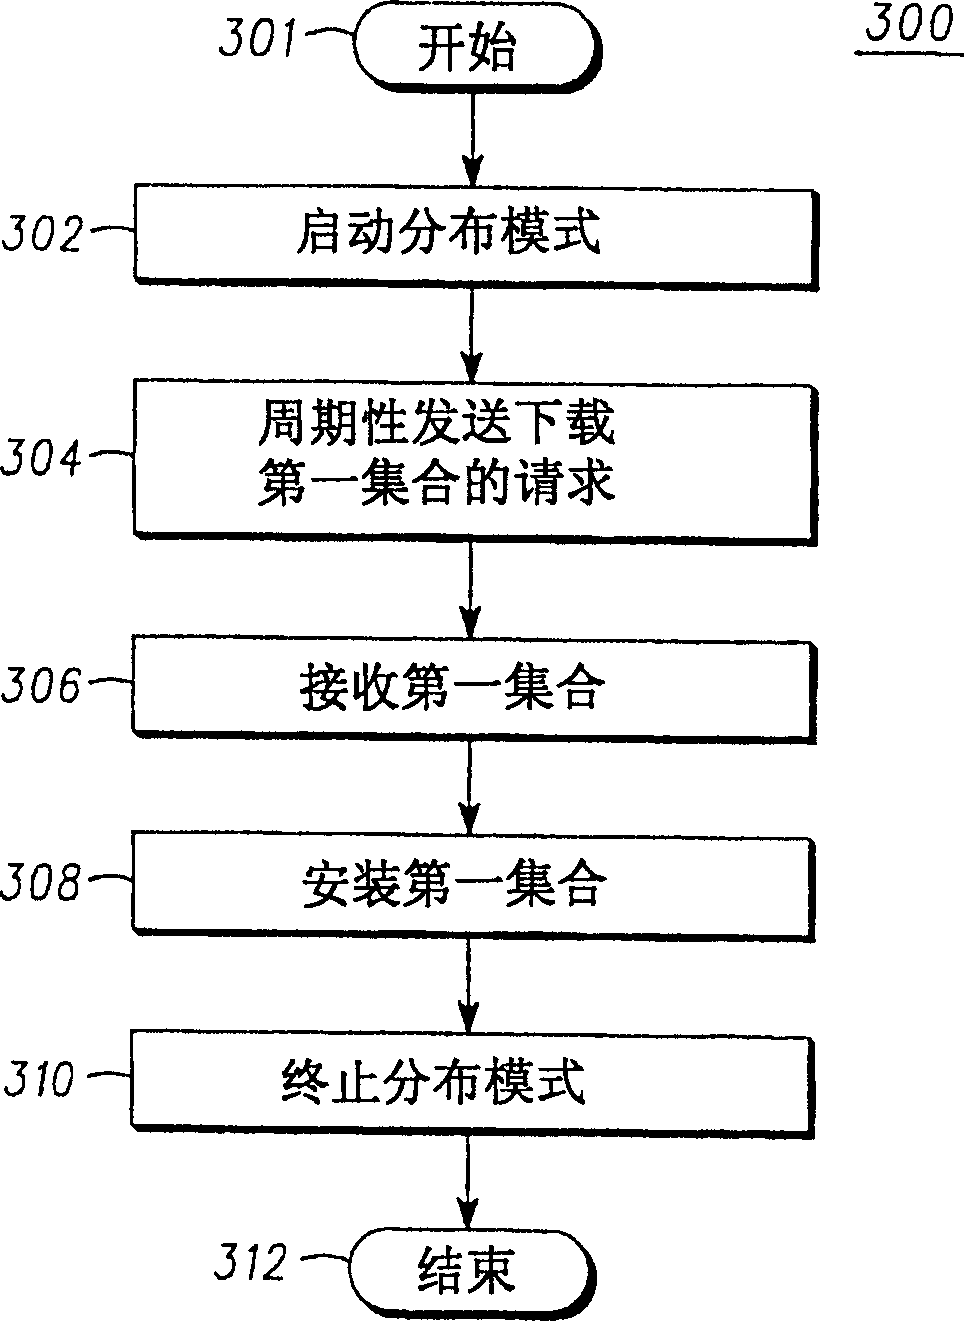 Over-the-air programming method for wireless communication device